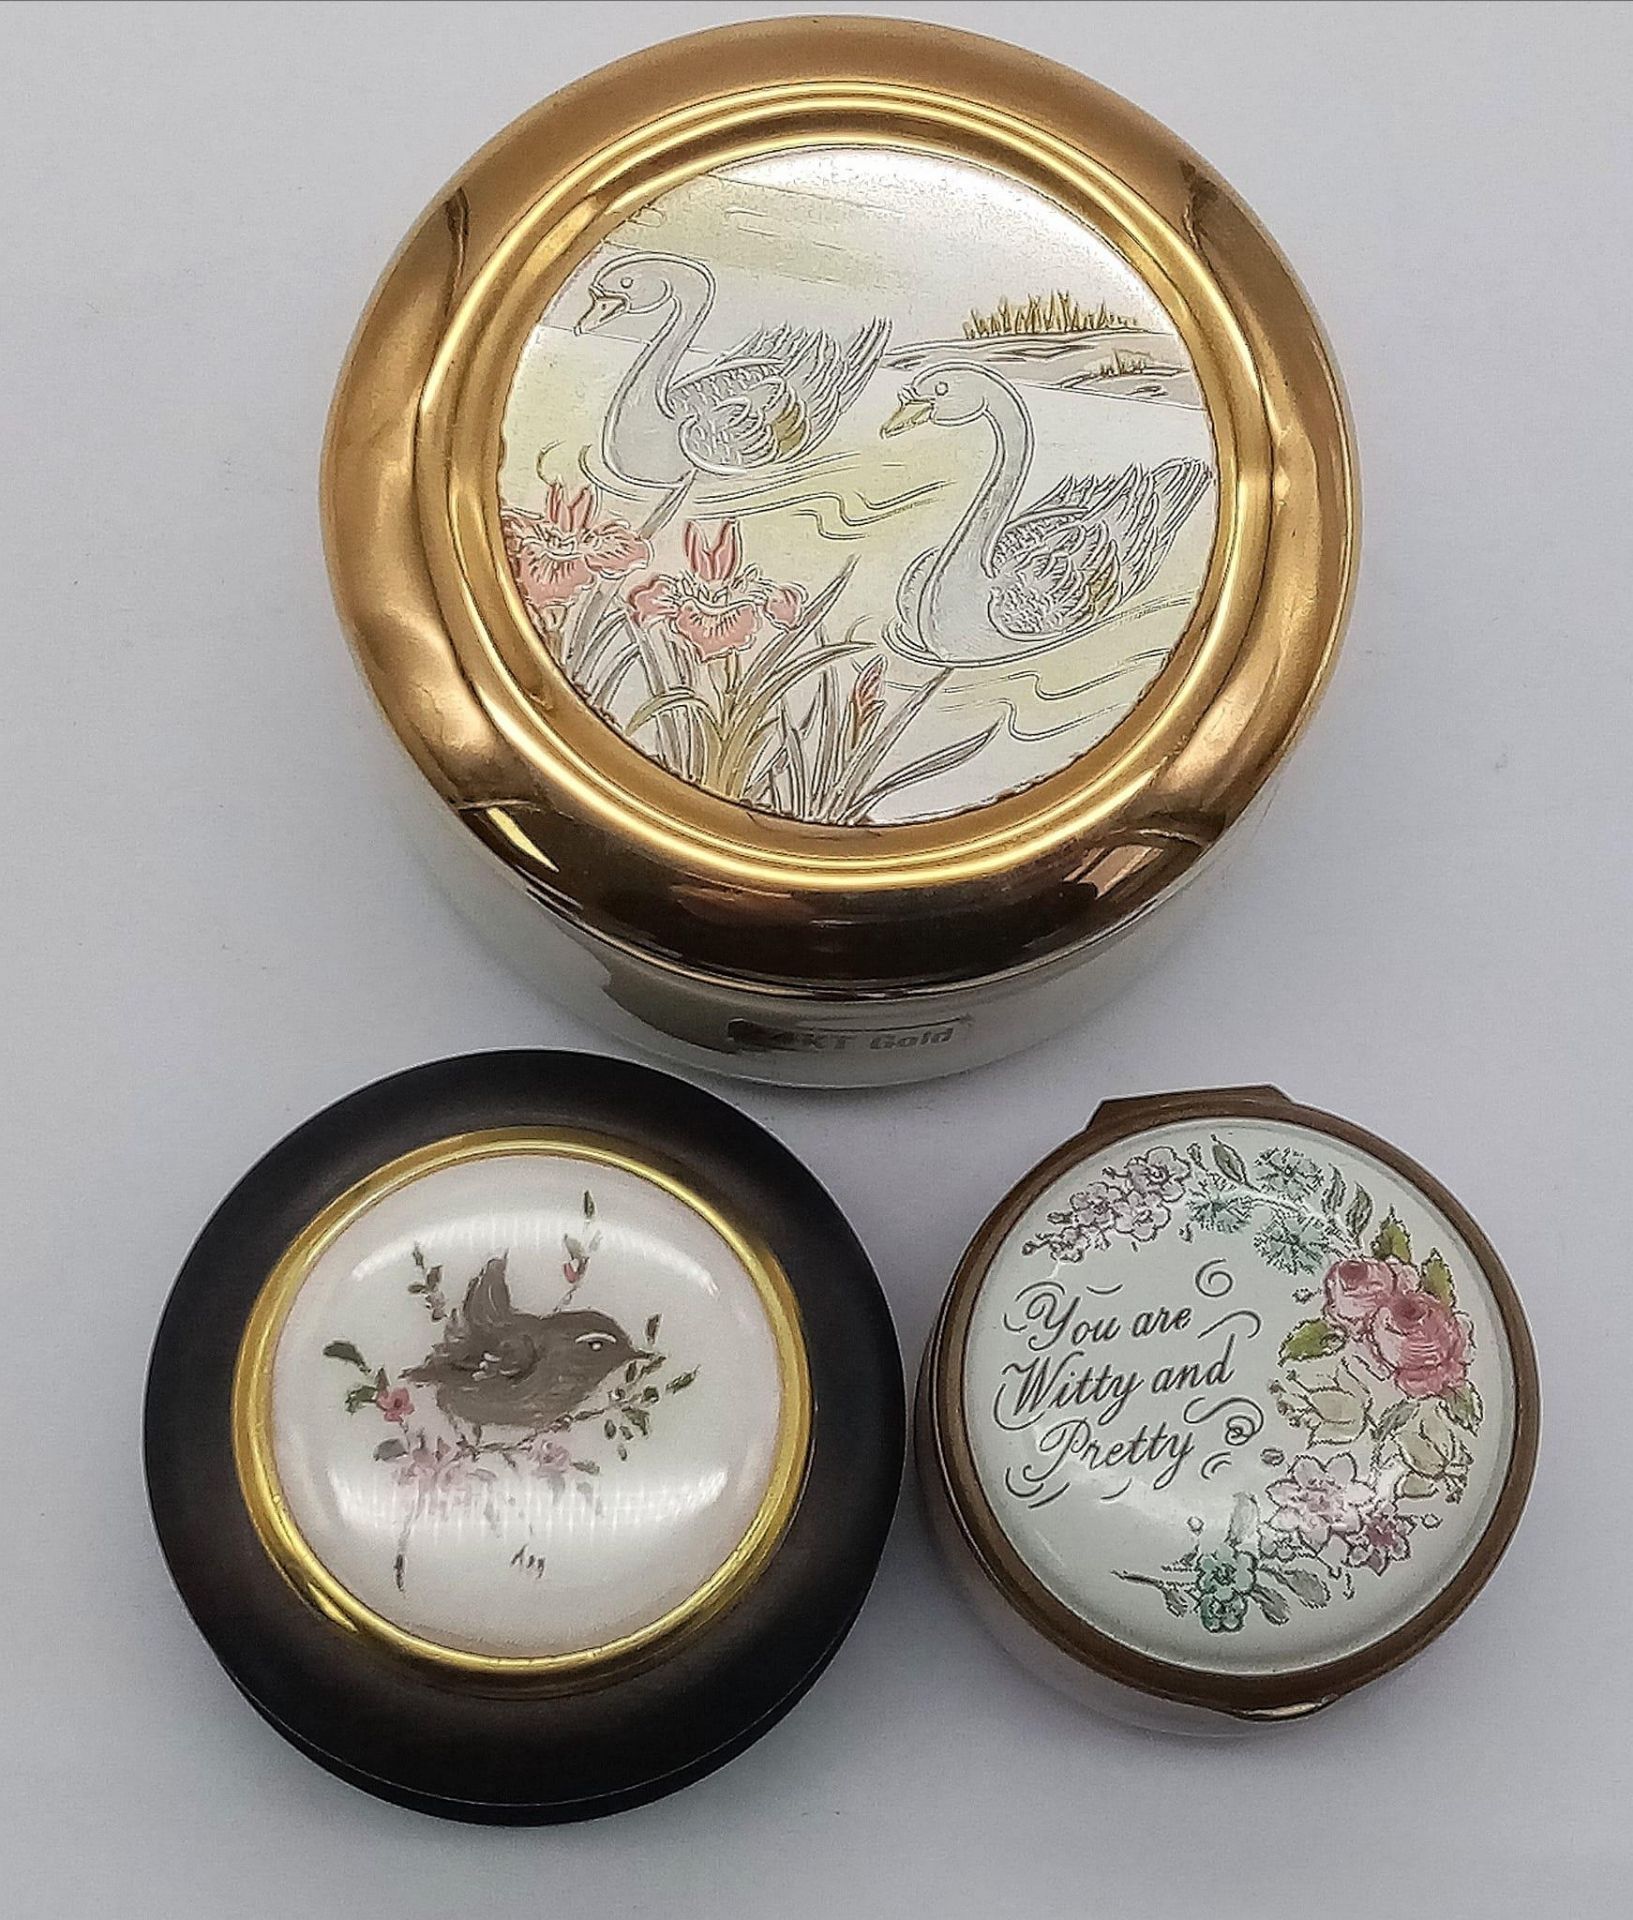 3 NICE TRINKET BOXES , ONE ORIENTAL GILDED WITH 24K GOLD, ONE ENGLISH ENAMEL AND AN INDIAN WOODEN